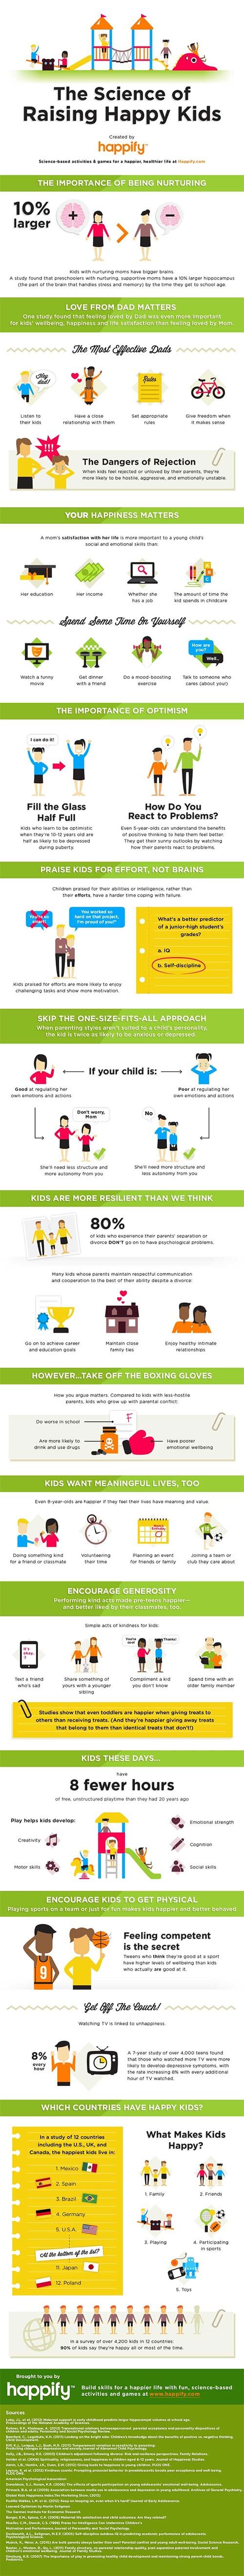 the science of raising happy kids infographic